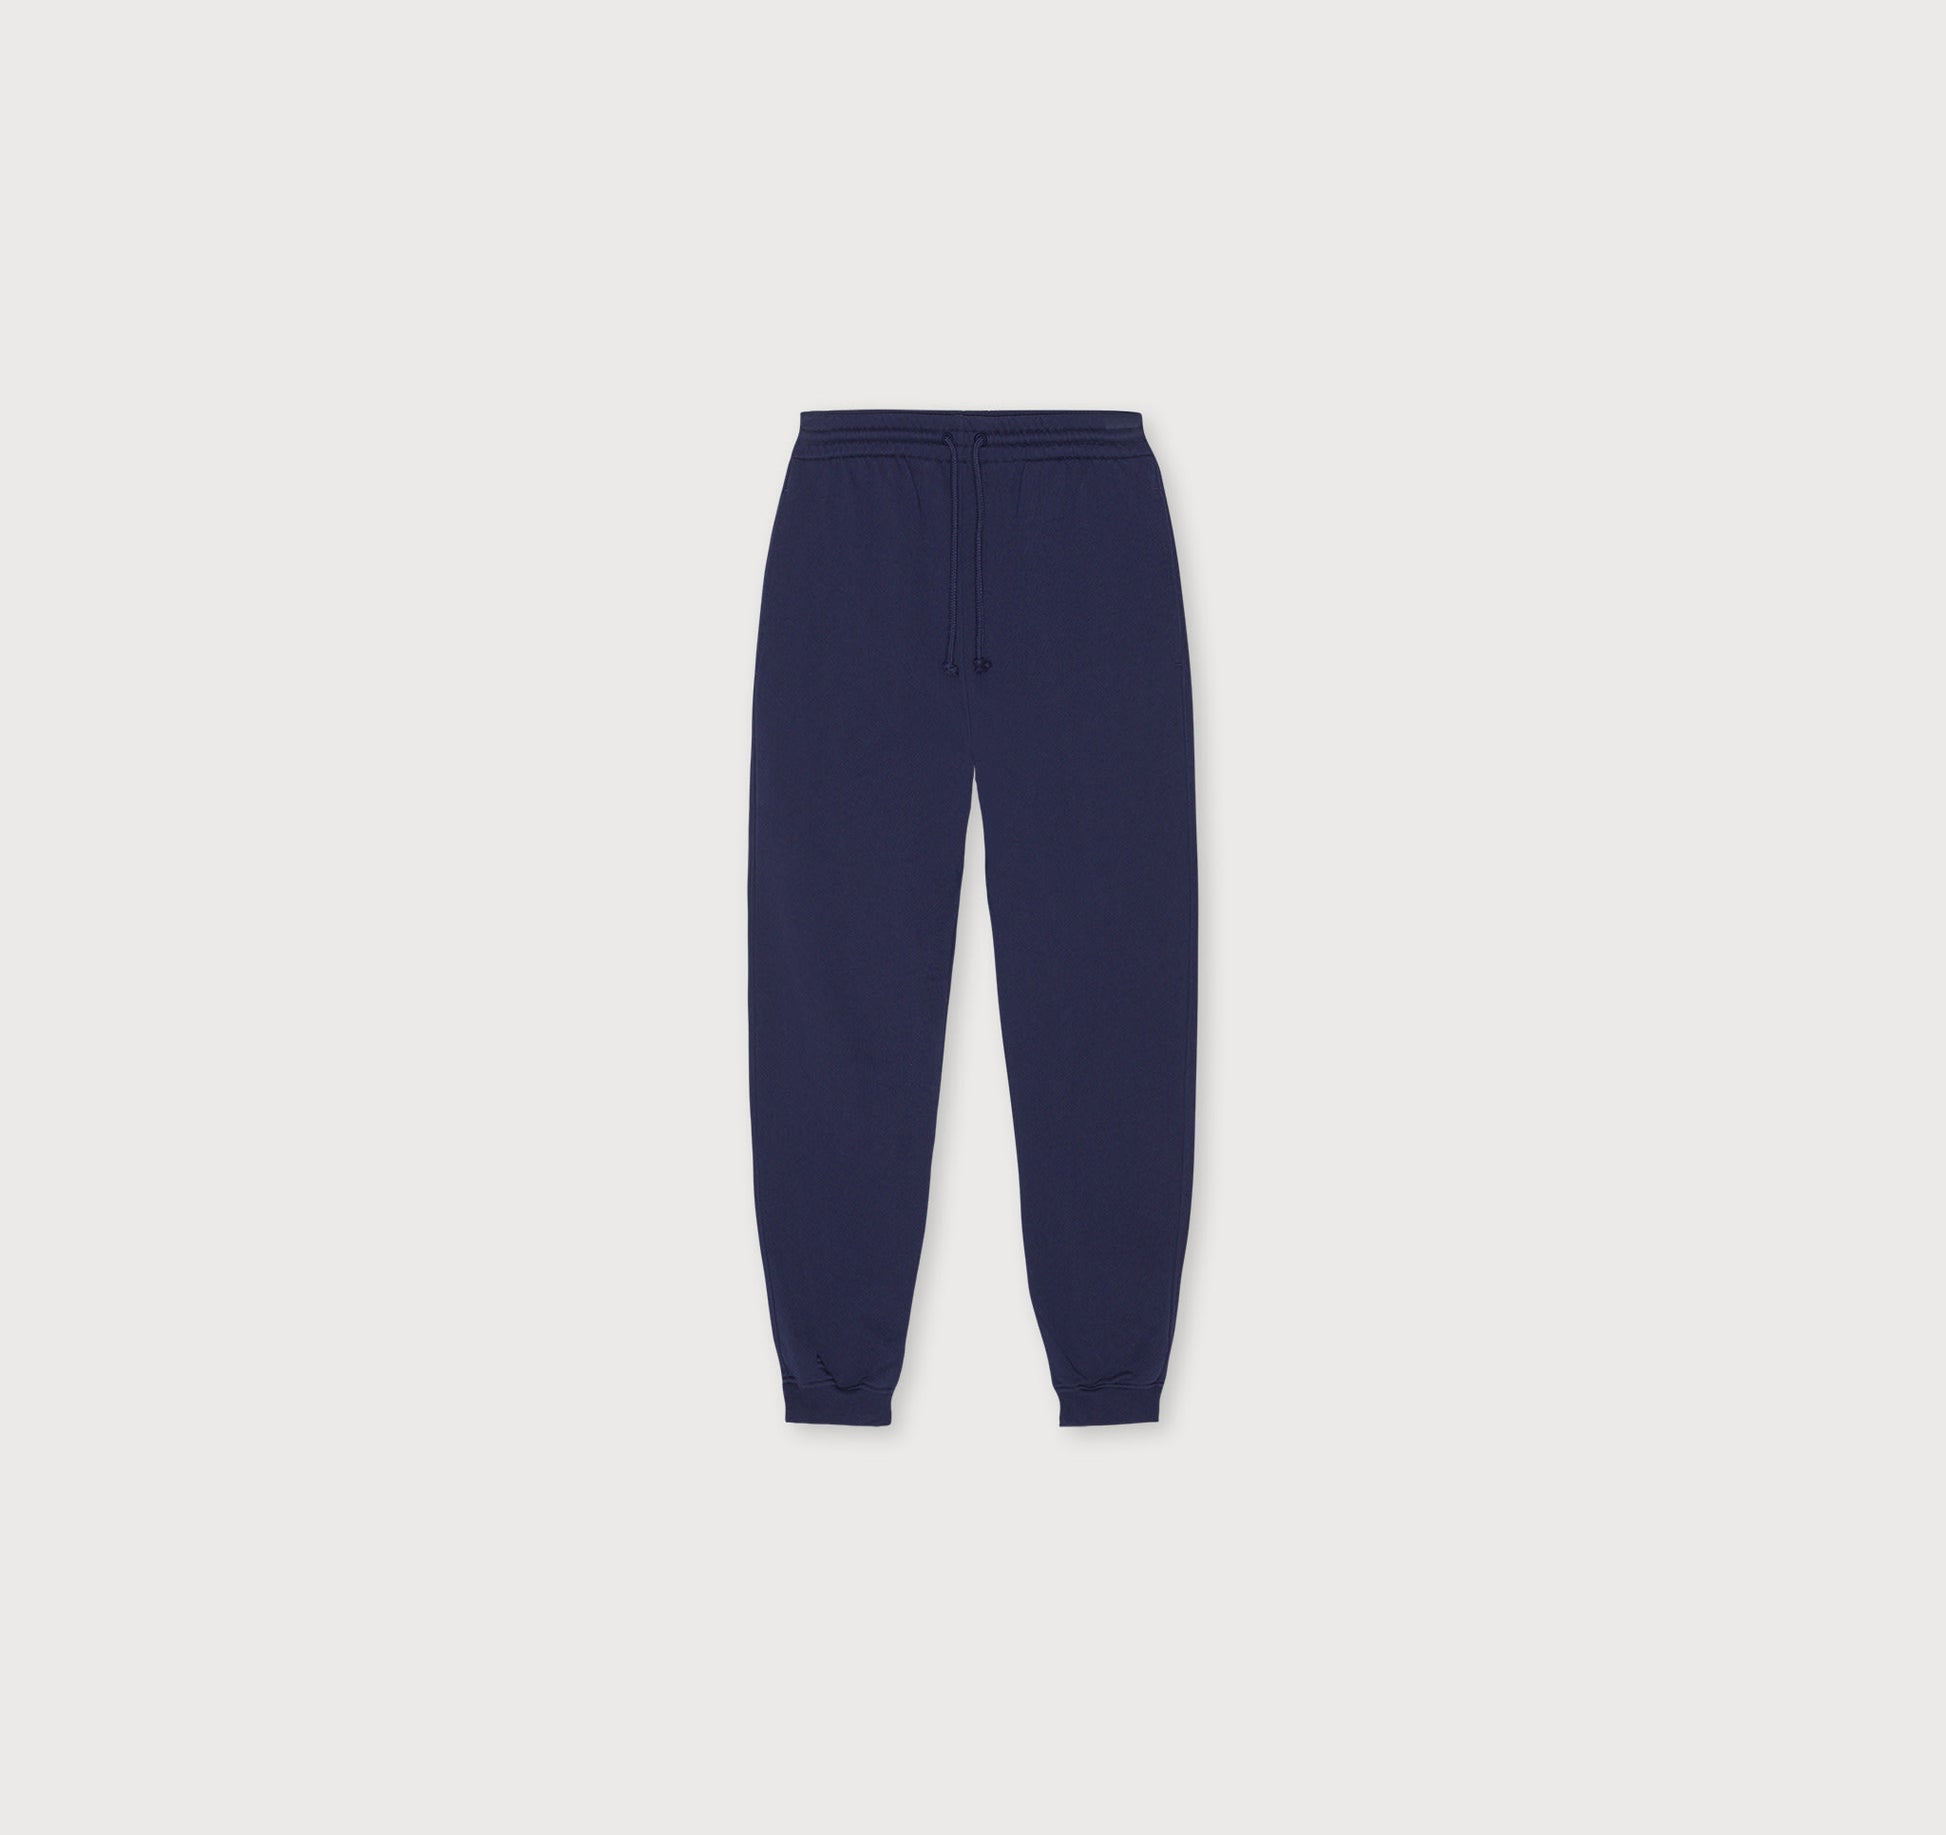 Buy True French-Terry Sweatpants, Fast Delivery